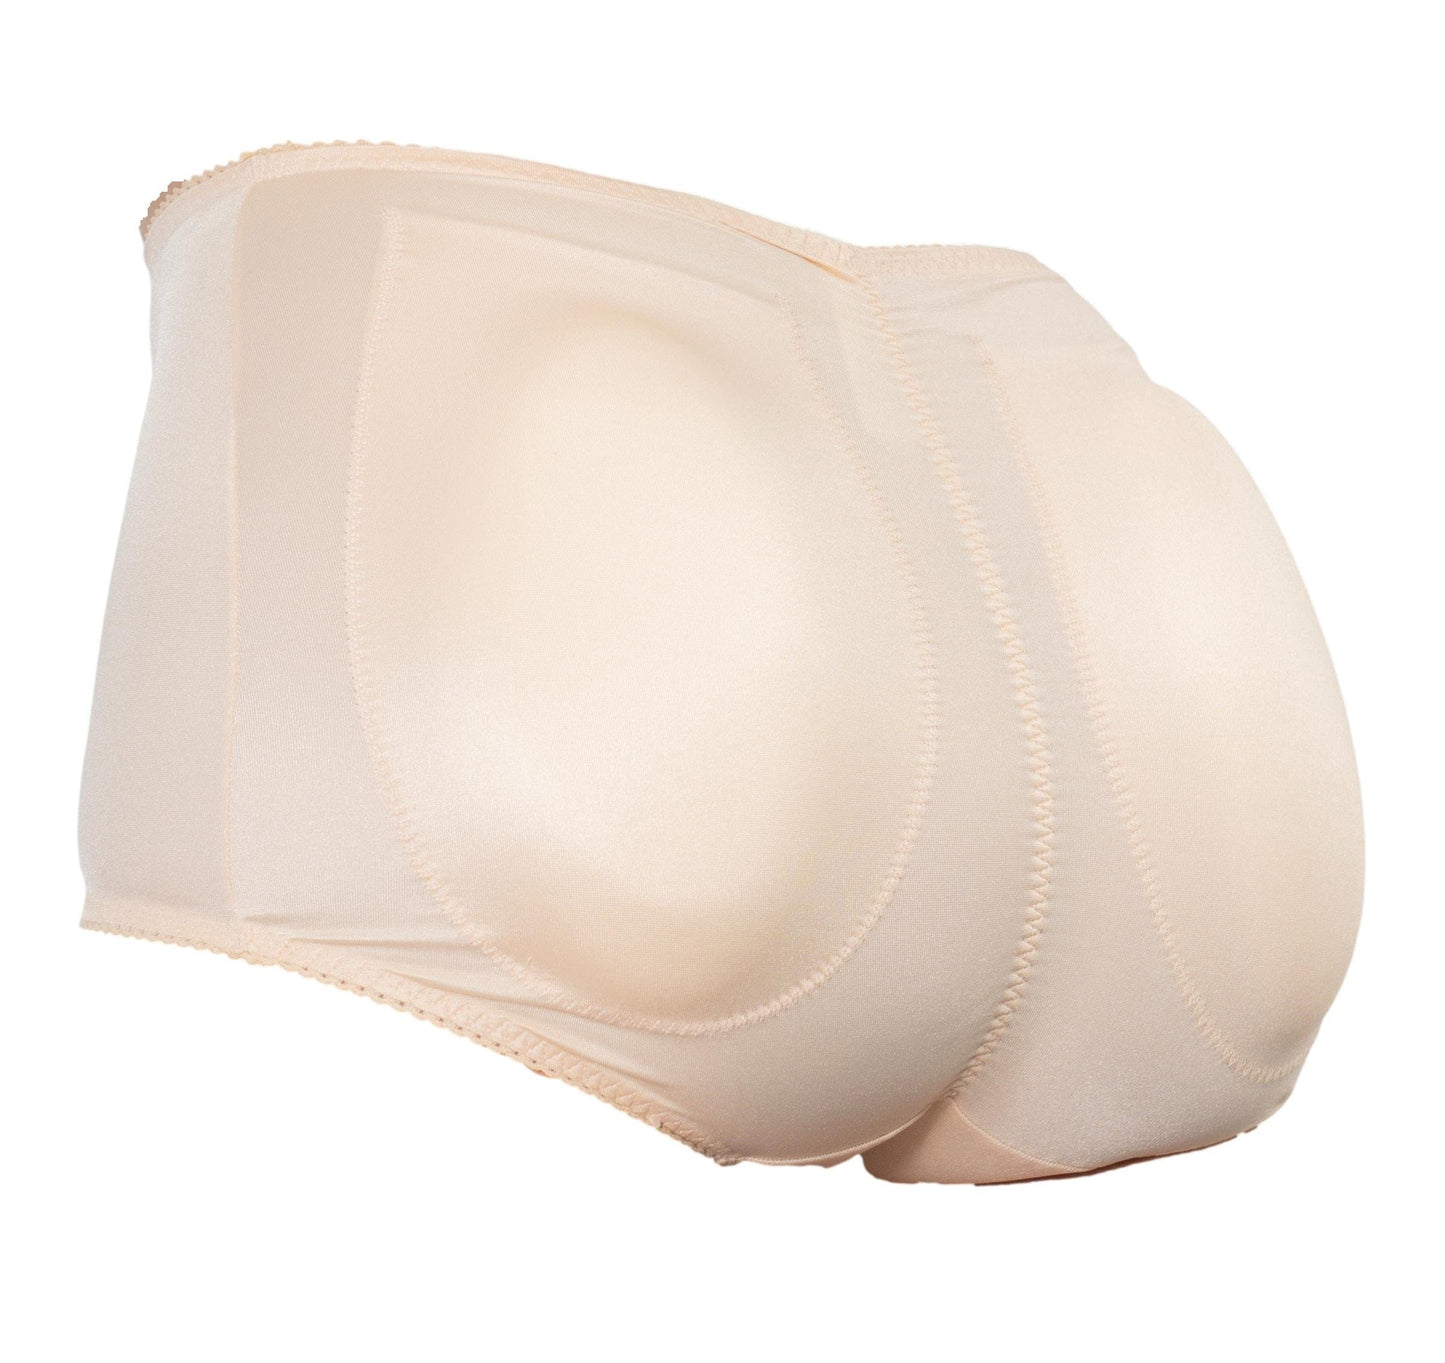 Style 914 | Panty Brief Light Shaping/Removable Pads